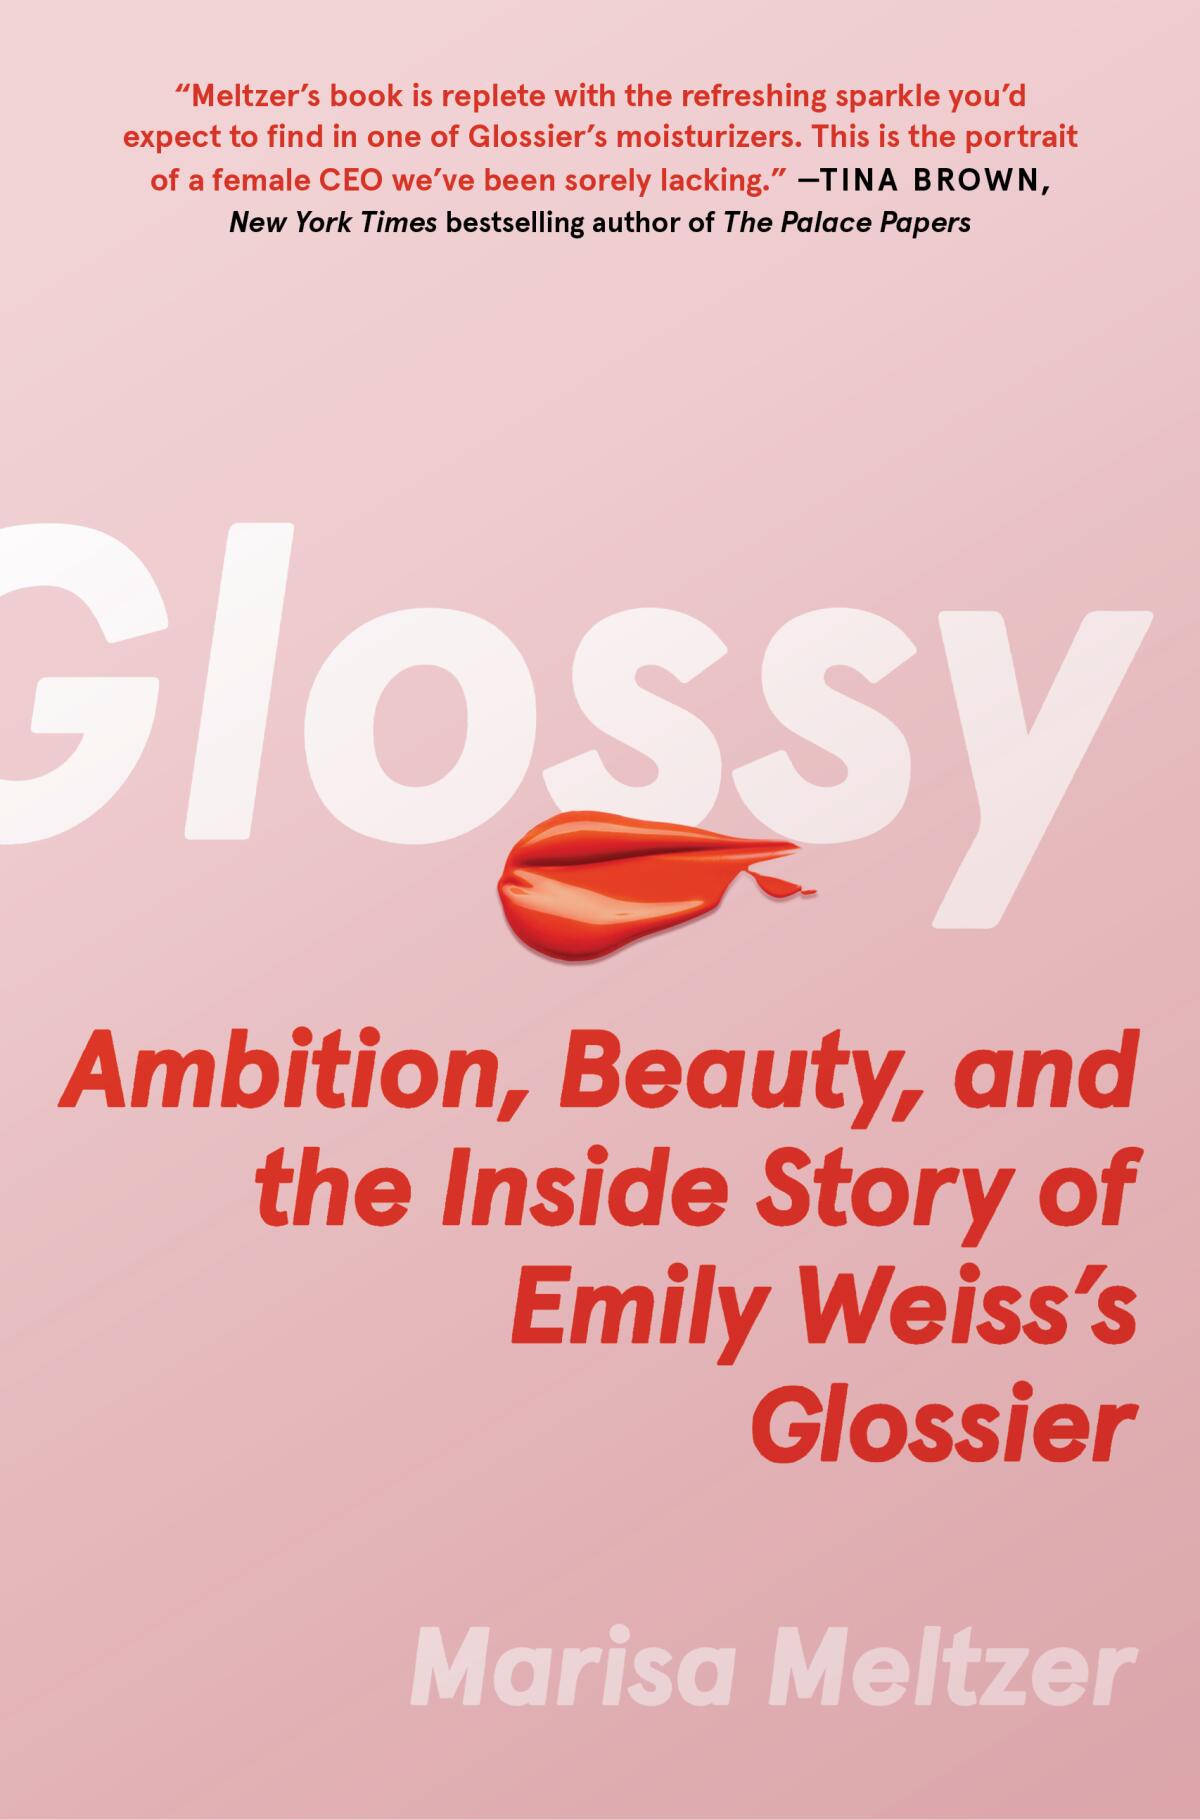 Glossy Pop Newsletter: Get Ready With Me, 9-Year-Old Edition — Aspiring  beauty influencers are getting younger - Glossy